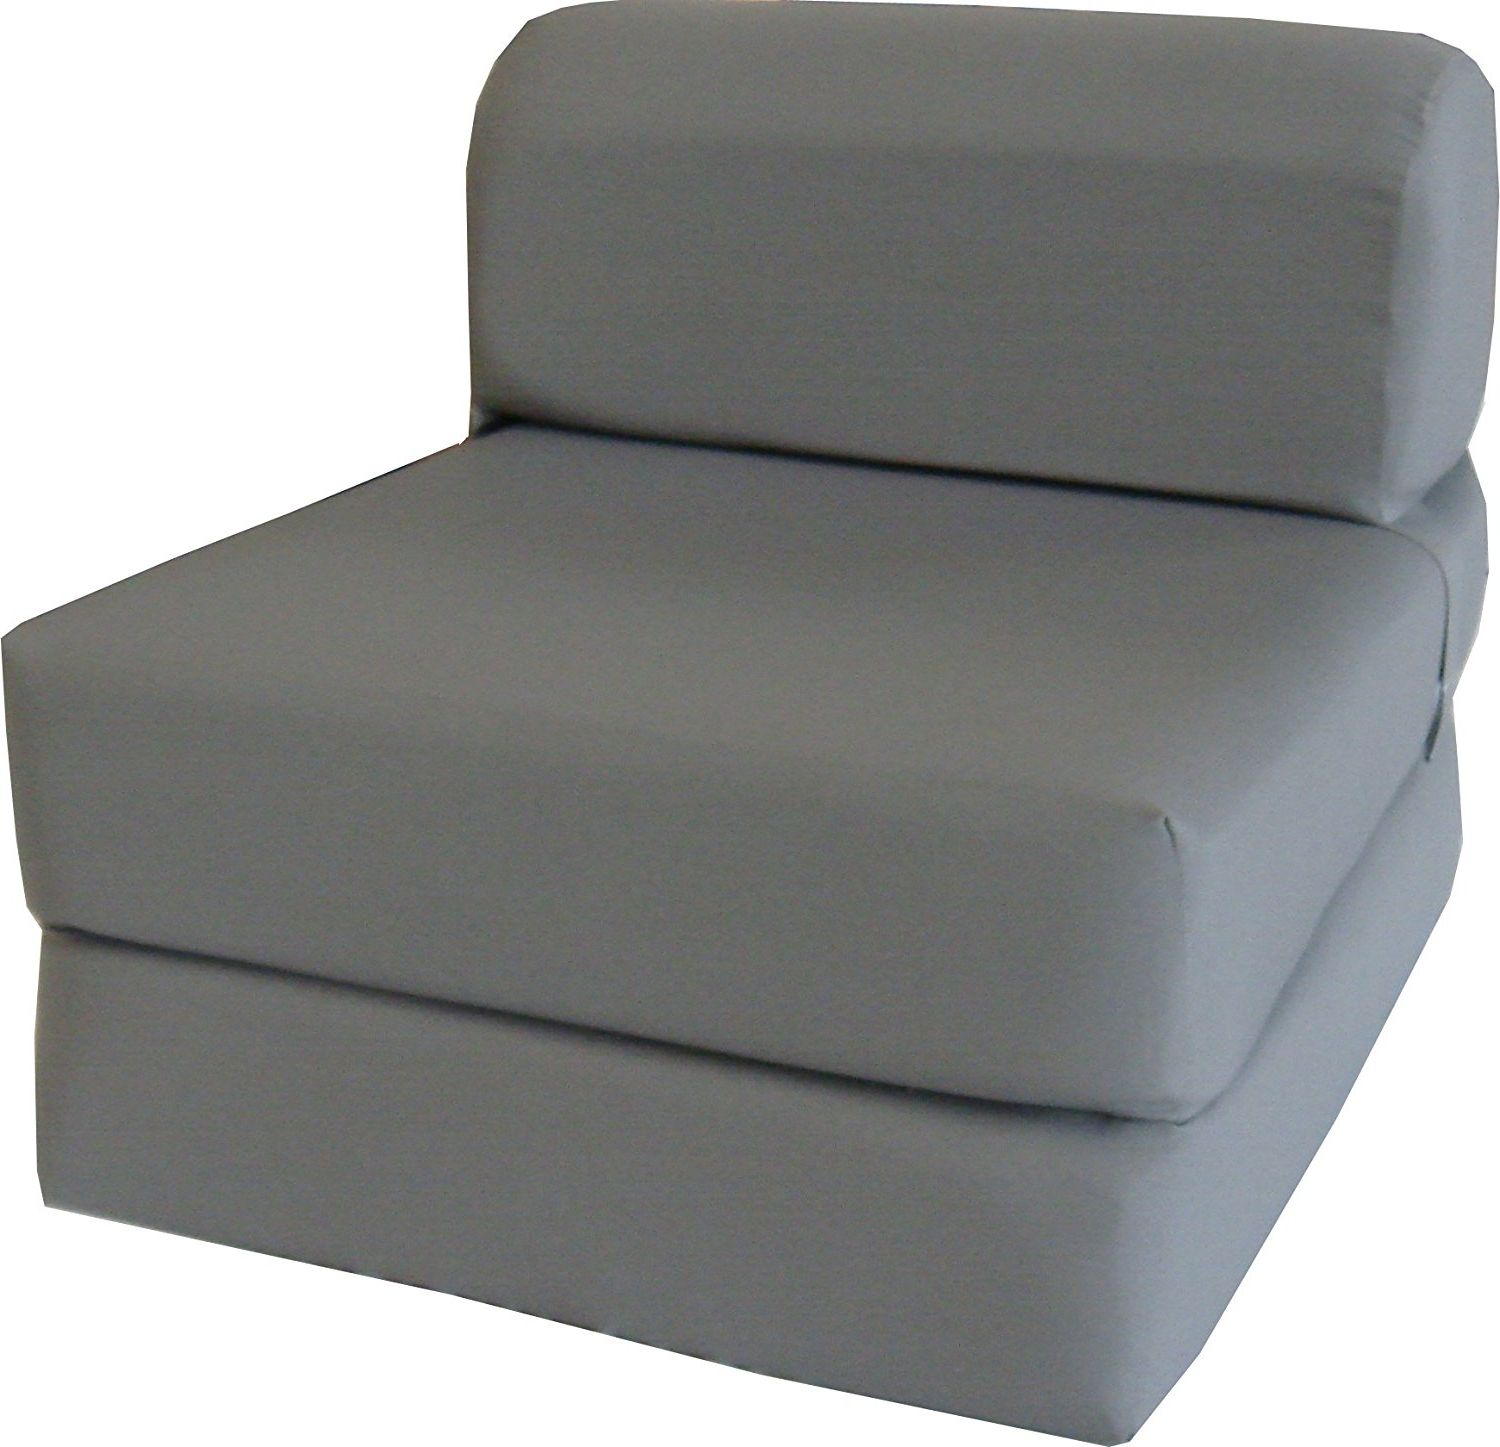 Amazon: Gray Sleeper Chair Folding Foam Bed Sized 6" Thick X With Regard To Well Liked Fold Up Sofa Chairs (View 1 of 15)